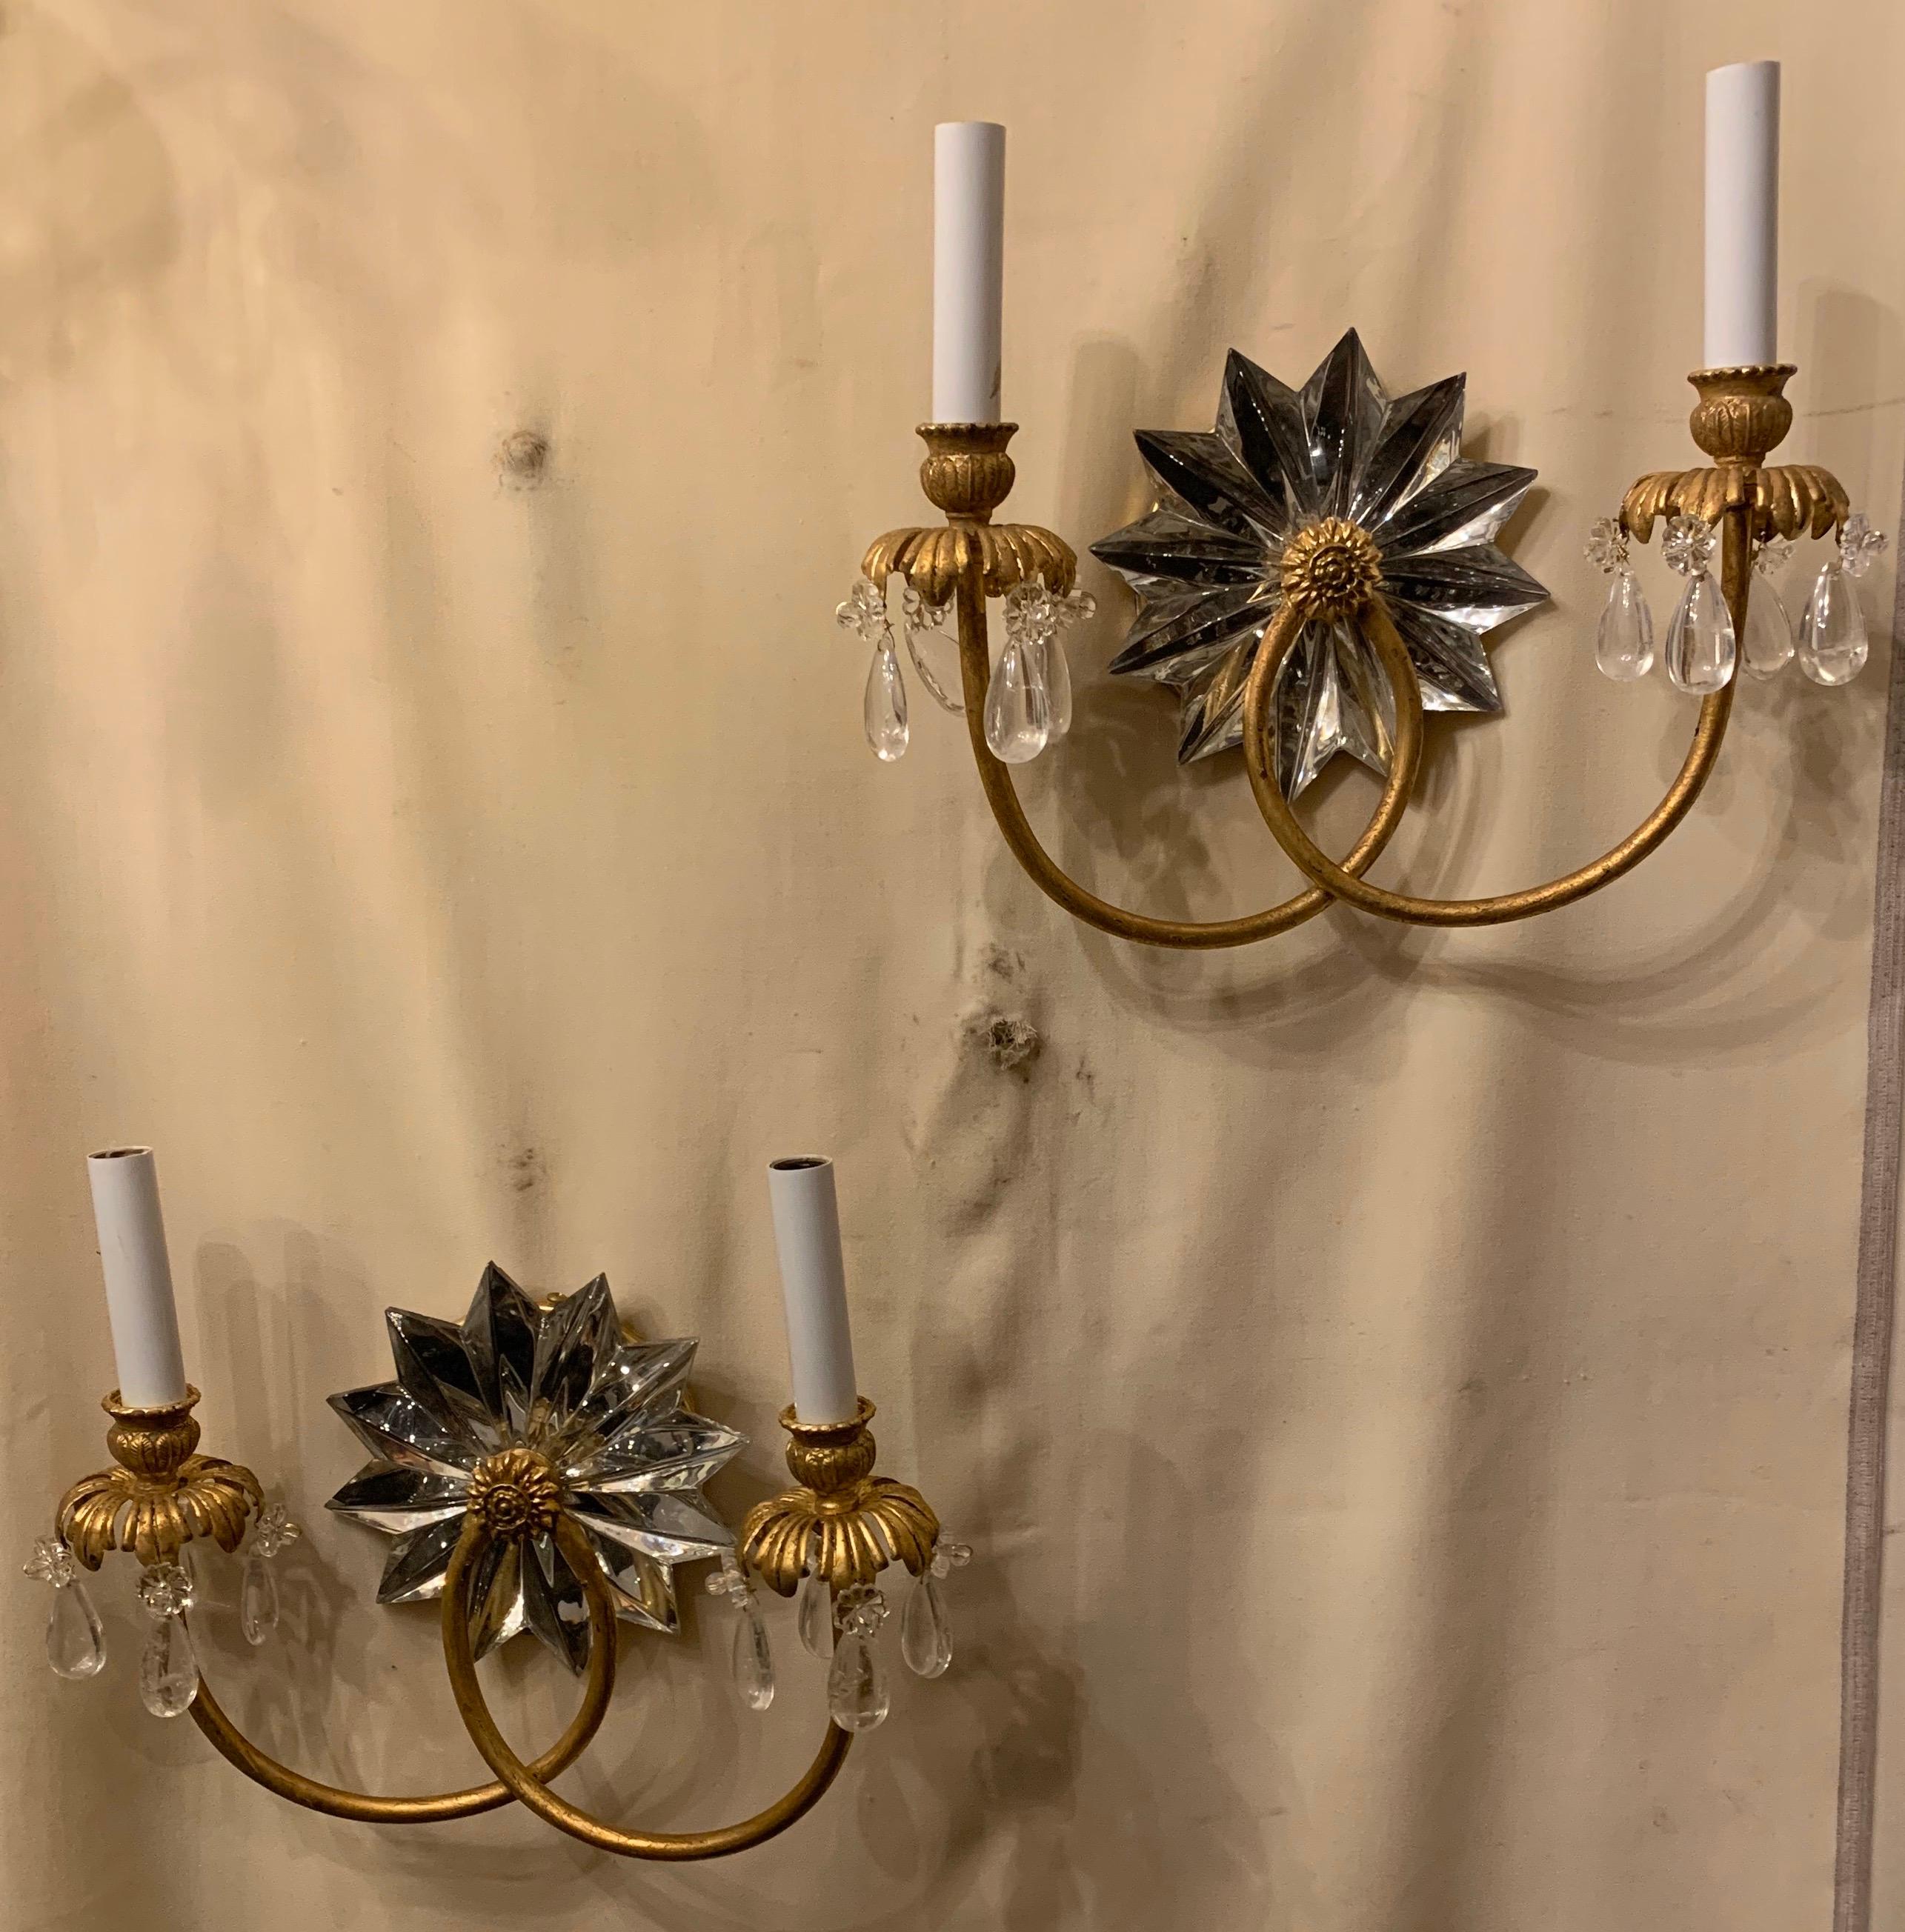 A wonderful pair of Mid-Century Modern star crystal center medallion adorned with rock crystals around the cups, in a gold gilt finish these sconces are in the manner of Baguès.
Completely rewired and come ready to install.